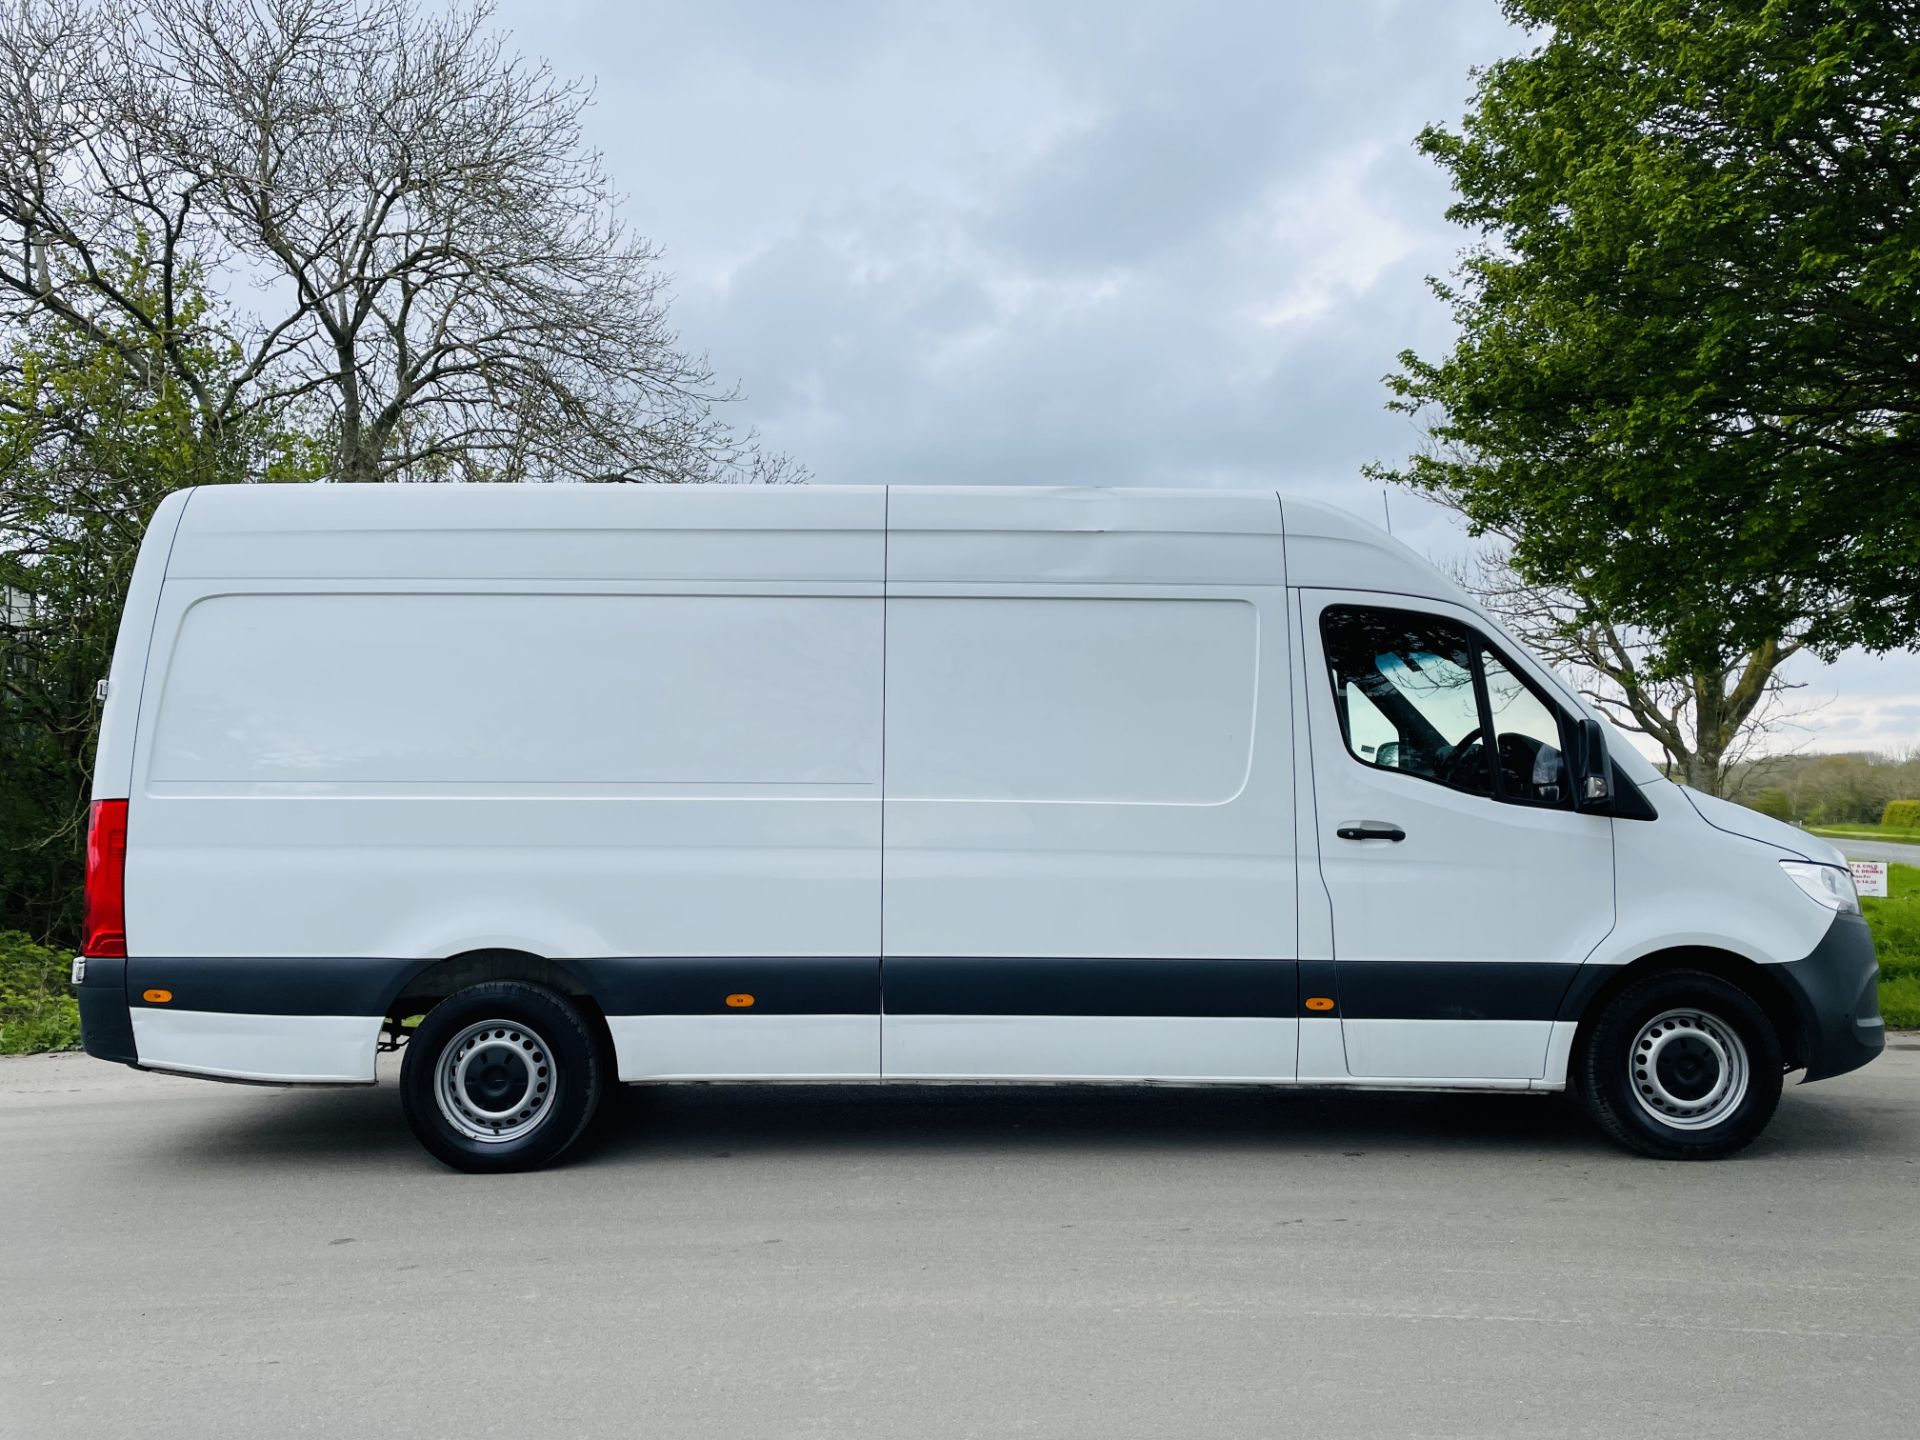 (ON SALE) MERCEDES SPRINTER 314CDI "LWB" HIGH ROOF (19 REG) EURO 6 - ONLY 83K MILES - CRUISE CONTROL - Image 2 of 17